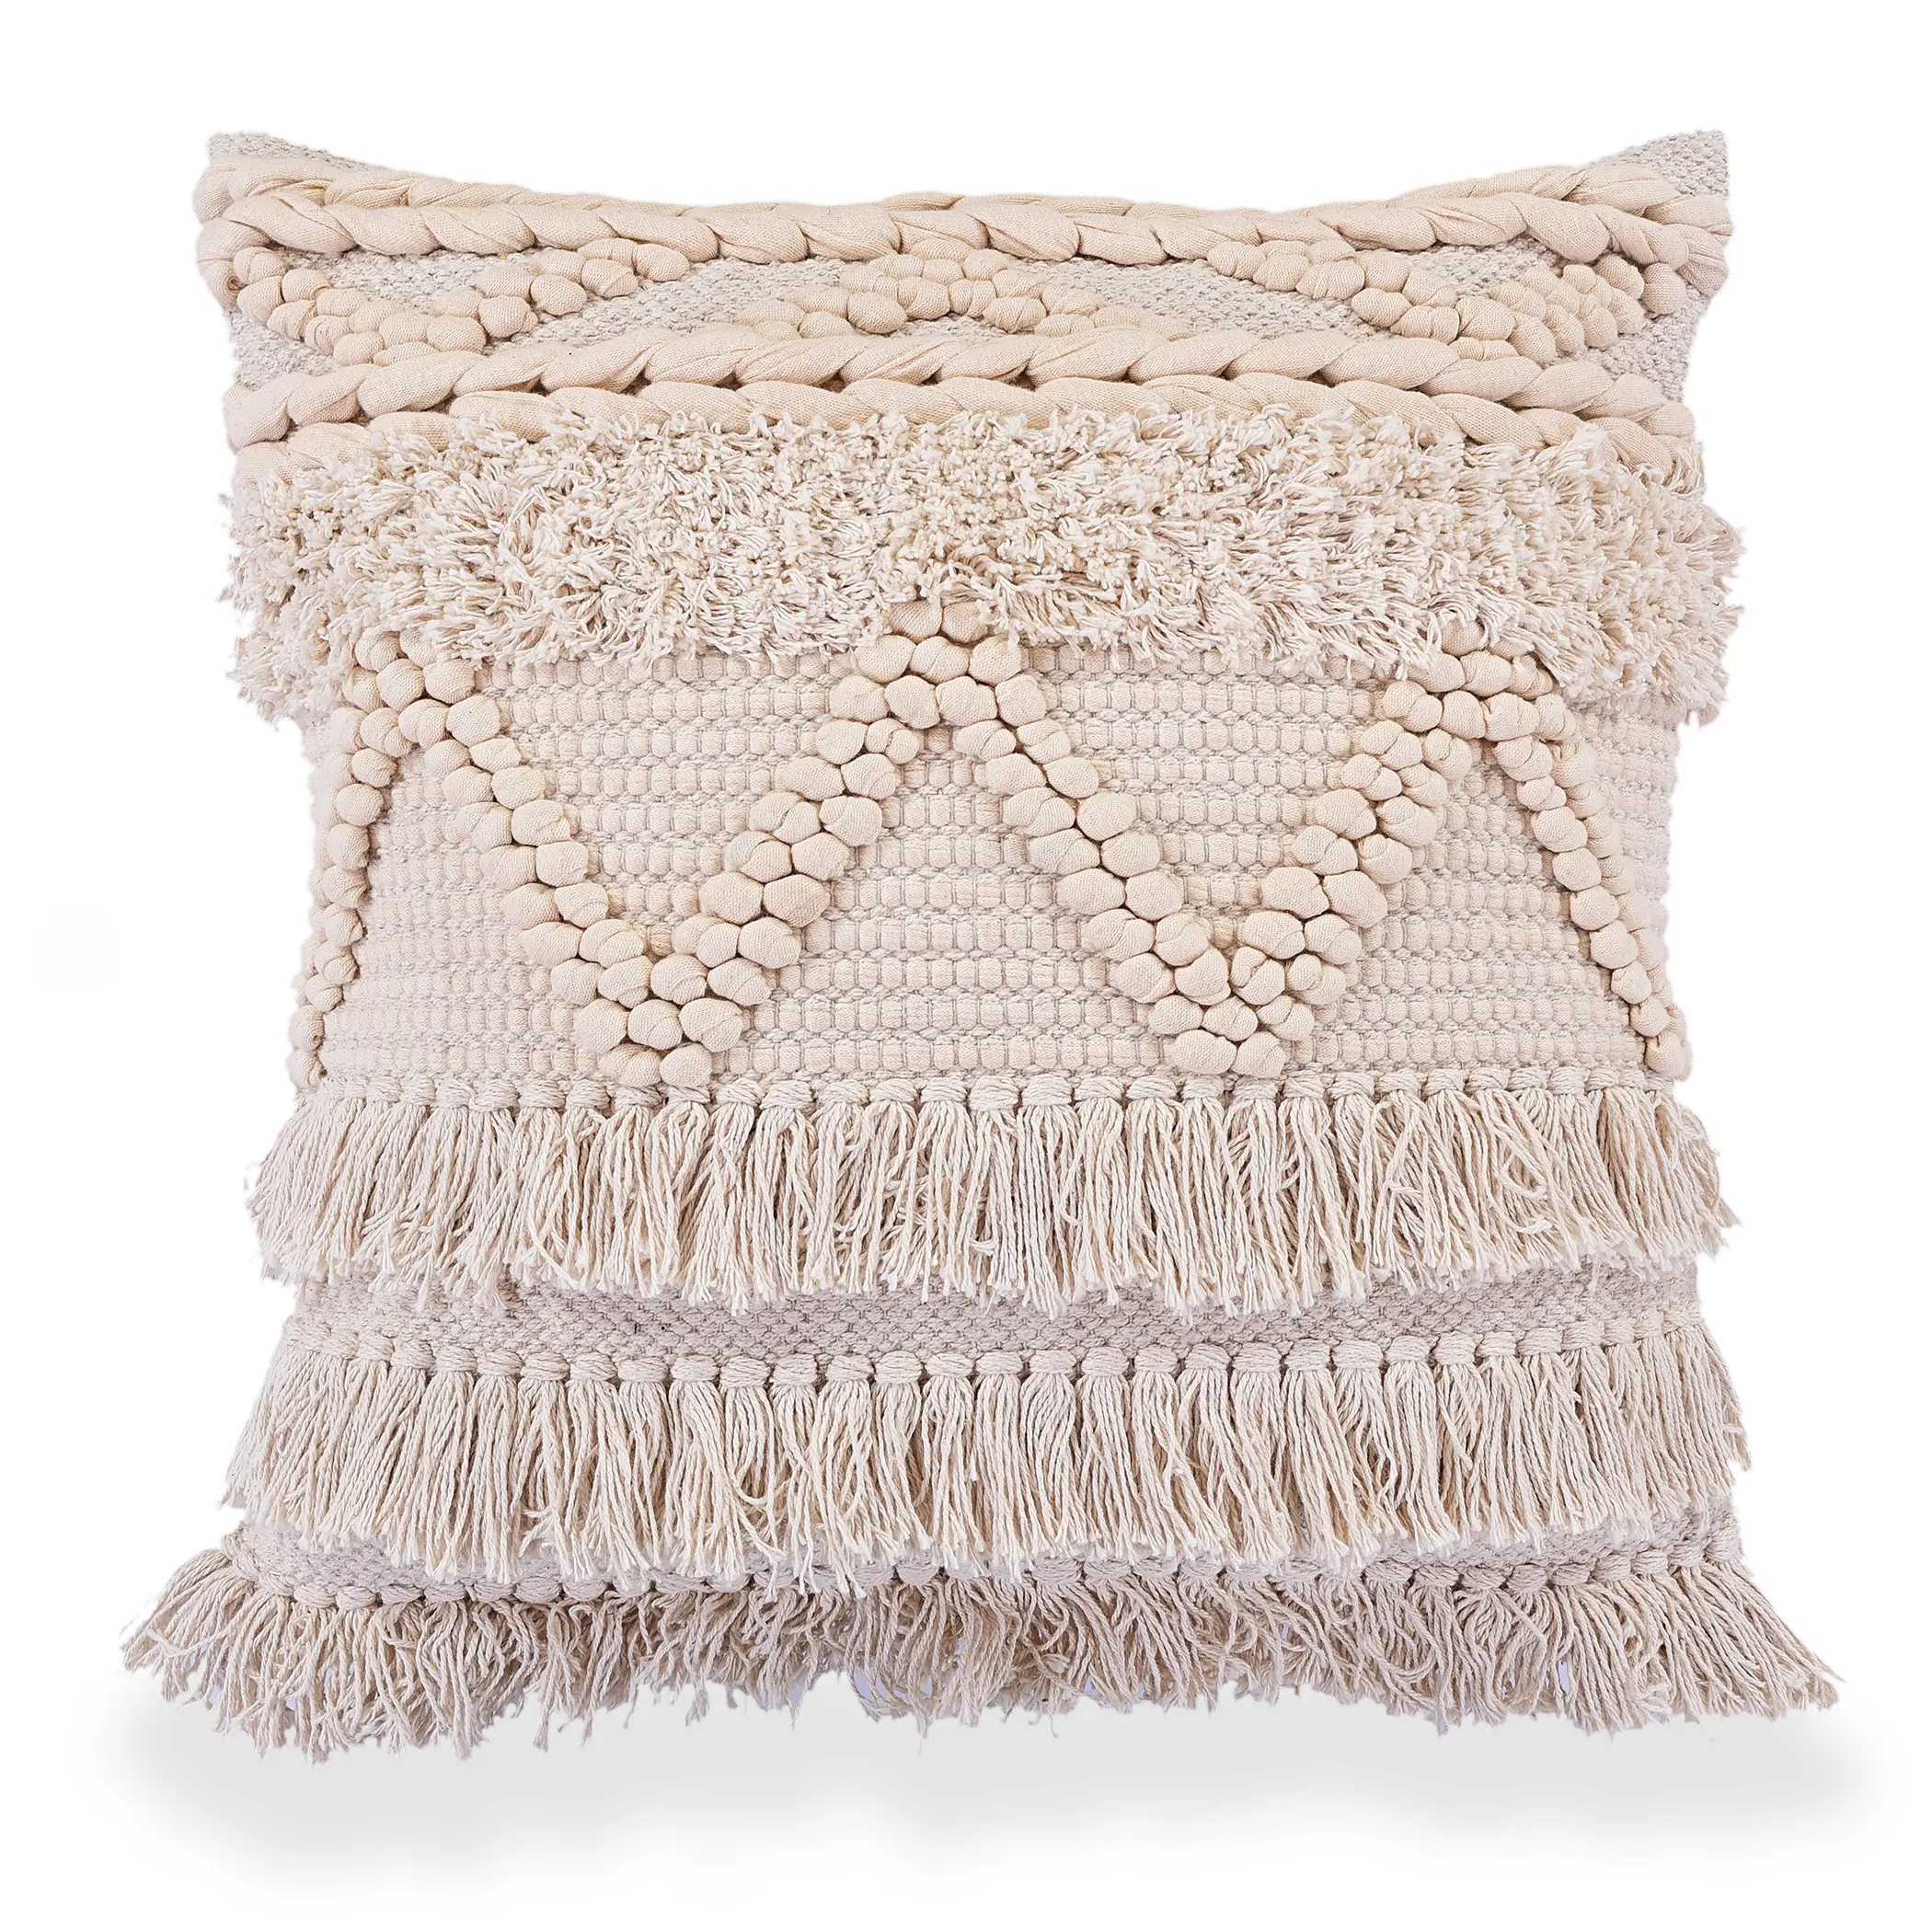 Boho Decorative woven Cushion cover Braided Pattern Pillow Cover with Loop tufts and fringes At cheap price White Pillow case